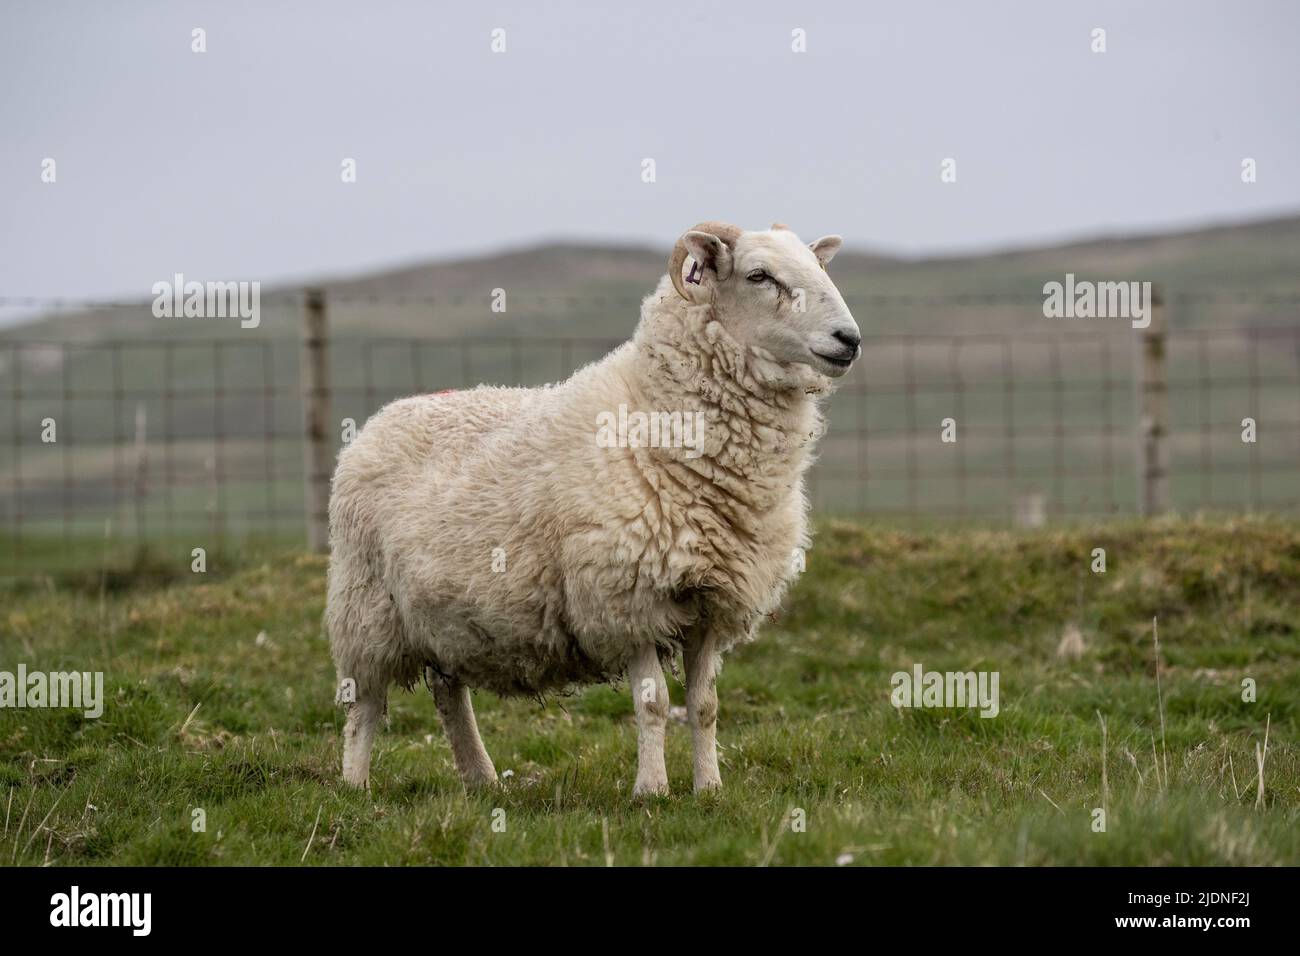 Solitary adult sheep (Ovis aries) in profile on rough pasture land taken from a low angle with a wire fence in the background in Berneray, Scotland Stock Photo